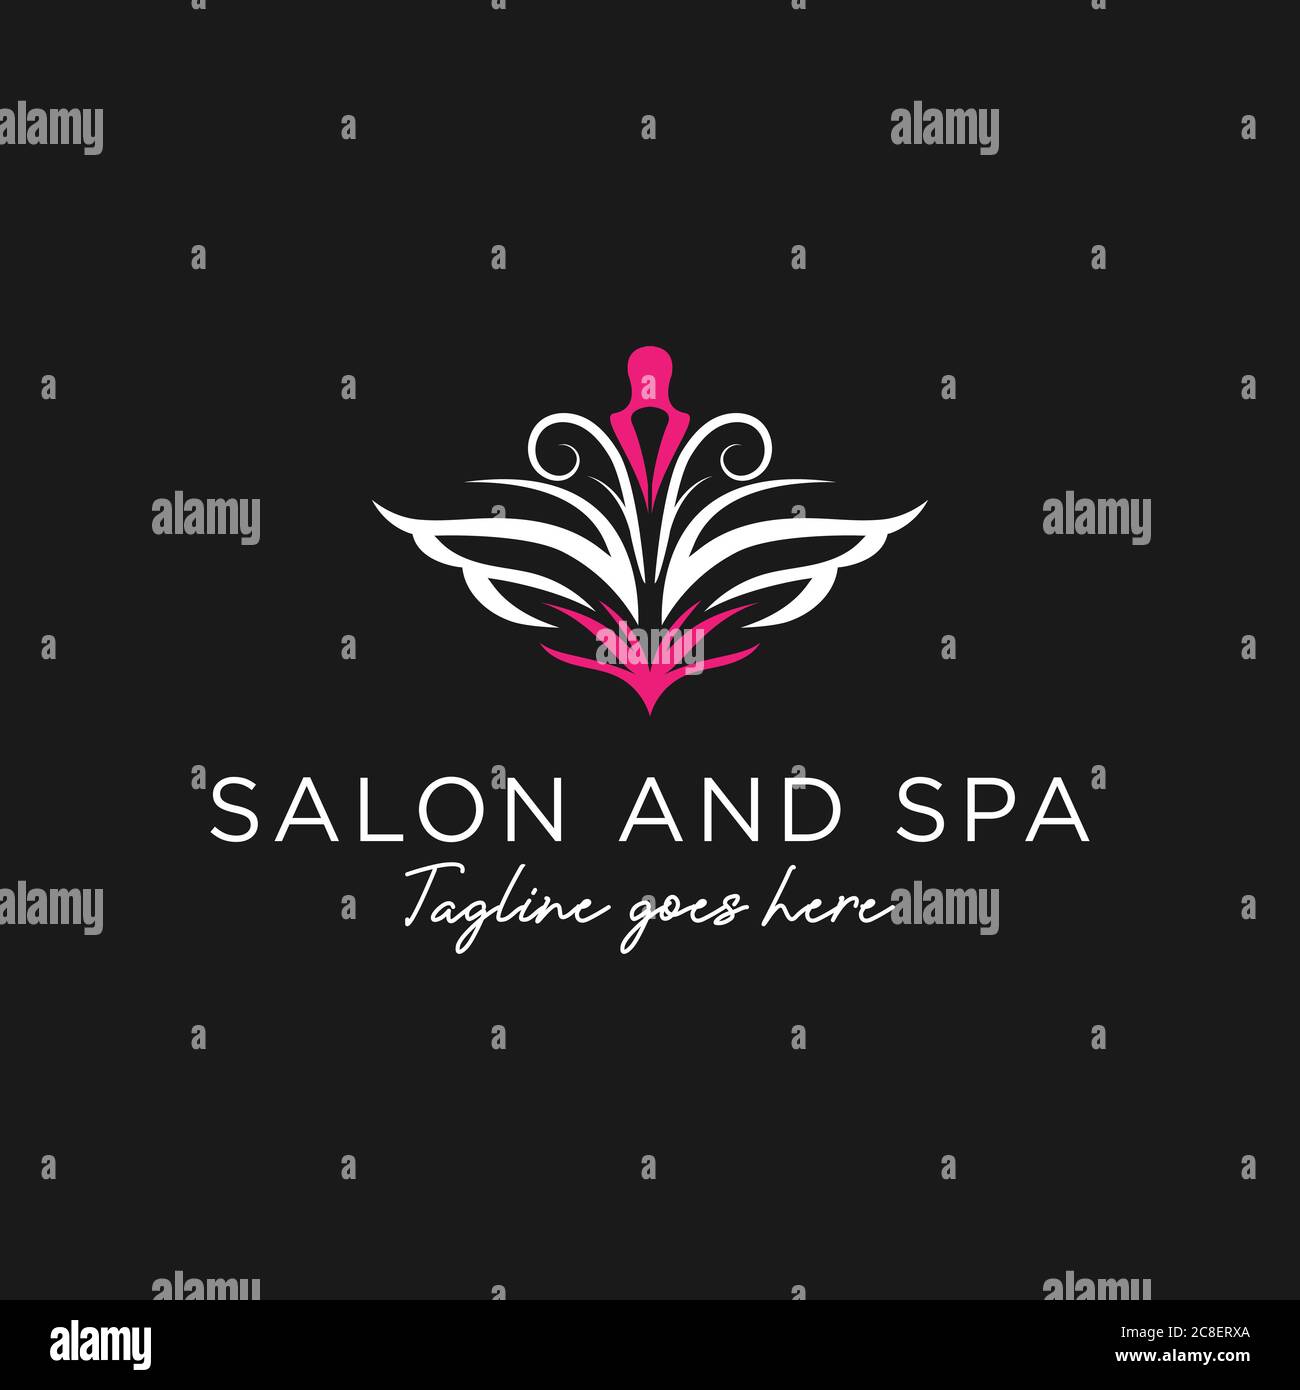 Luxury Salon and SPA Logo vector logo for Beauty woman and relaxation treatments,  abstract female fashion logo design template Stock Vector